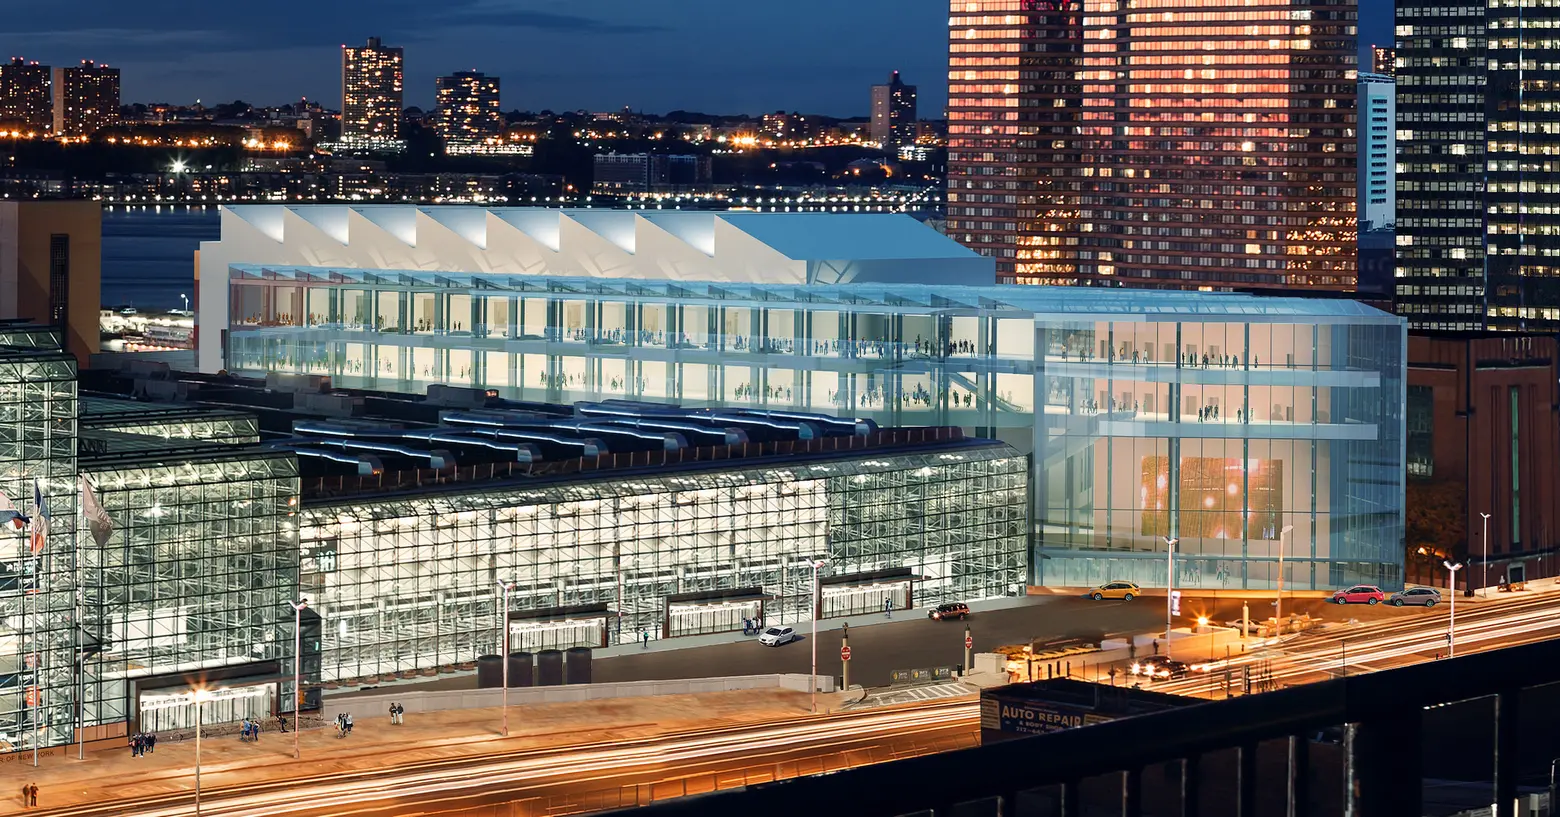 $1B Expansion Planned for the Javits Center